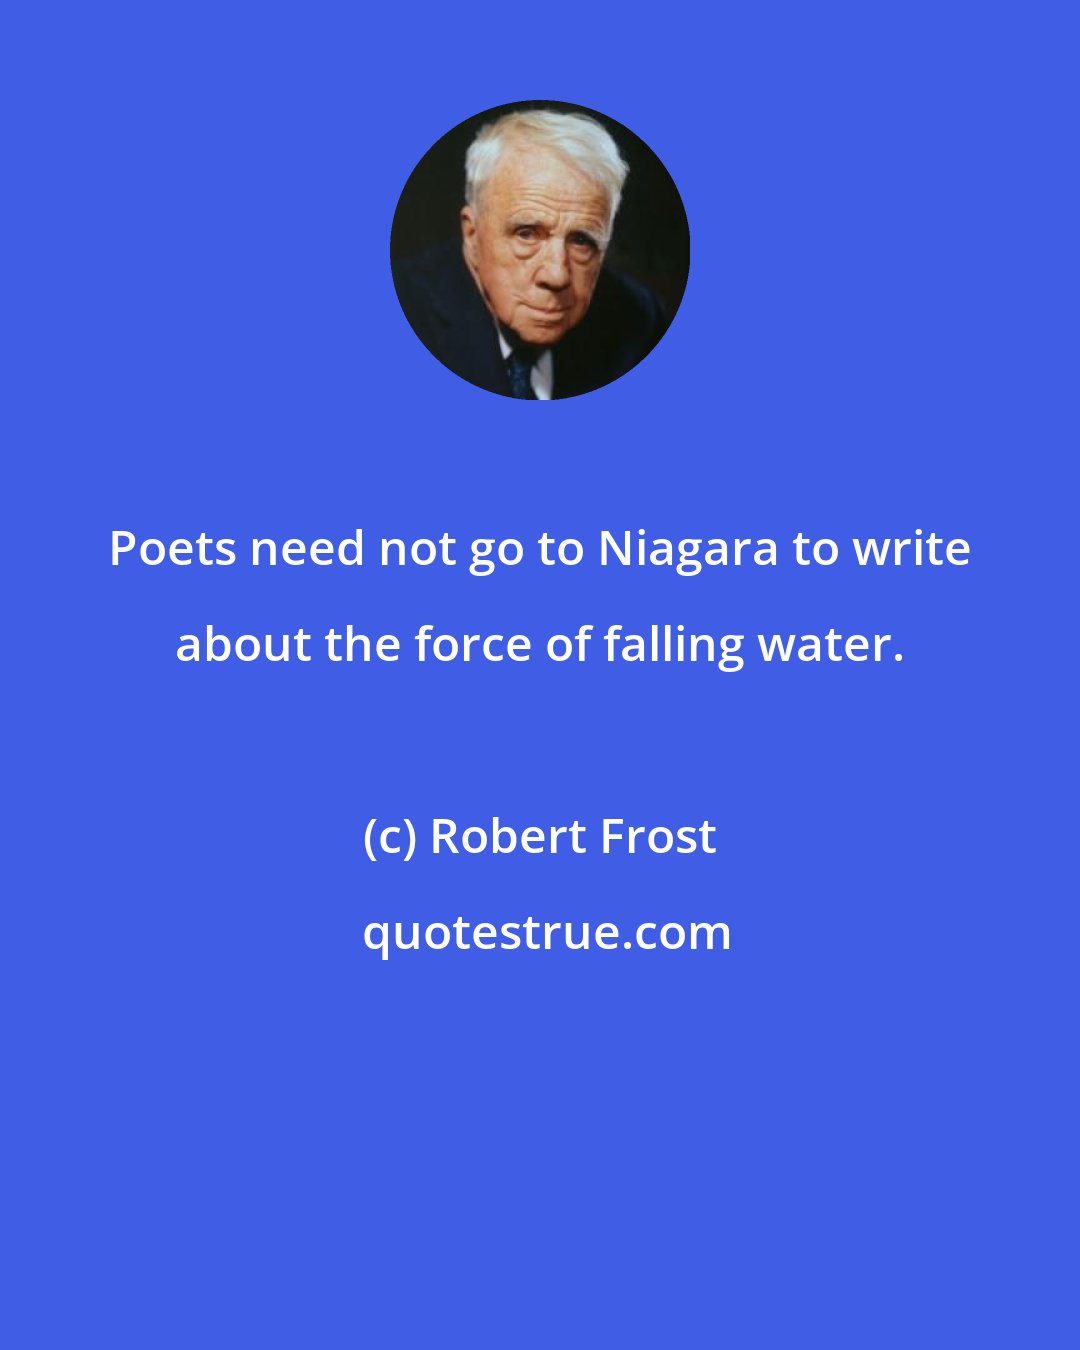 Robert Frost: Poets need not go to Niagara to write about the force of falling water.